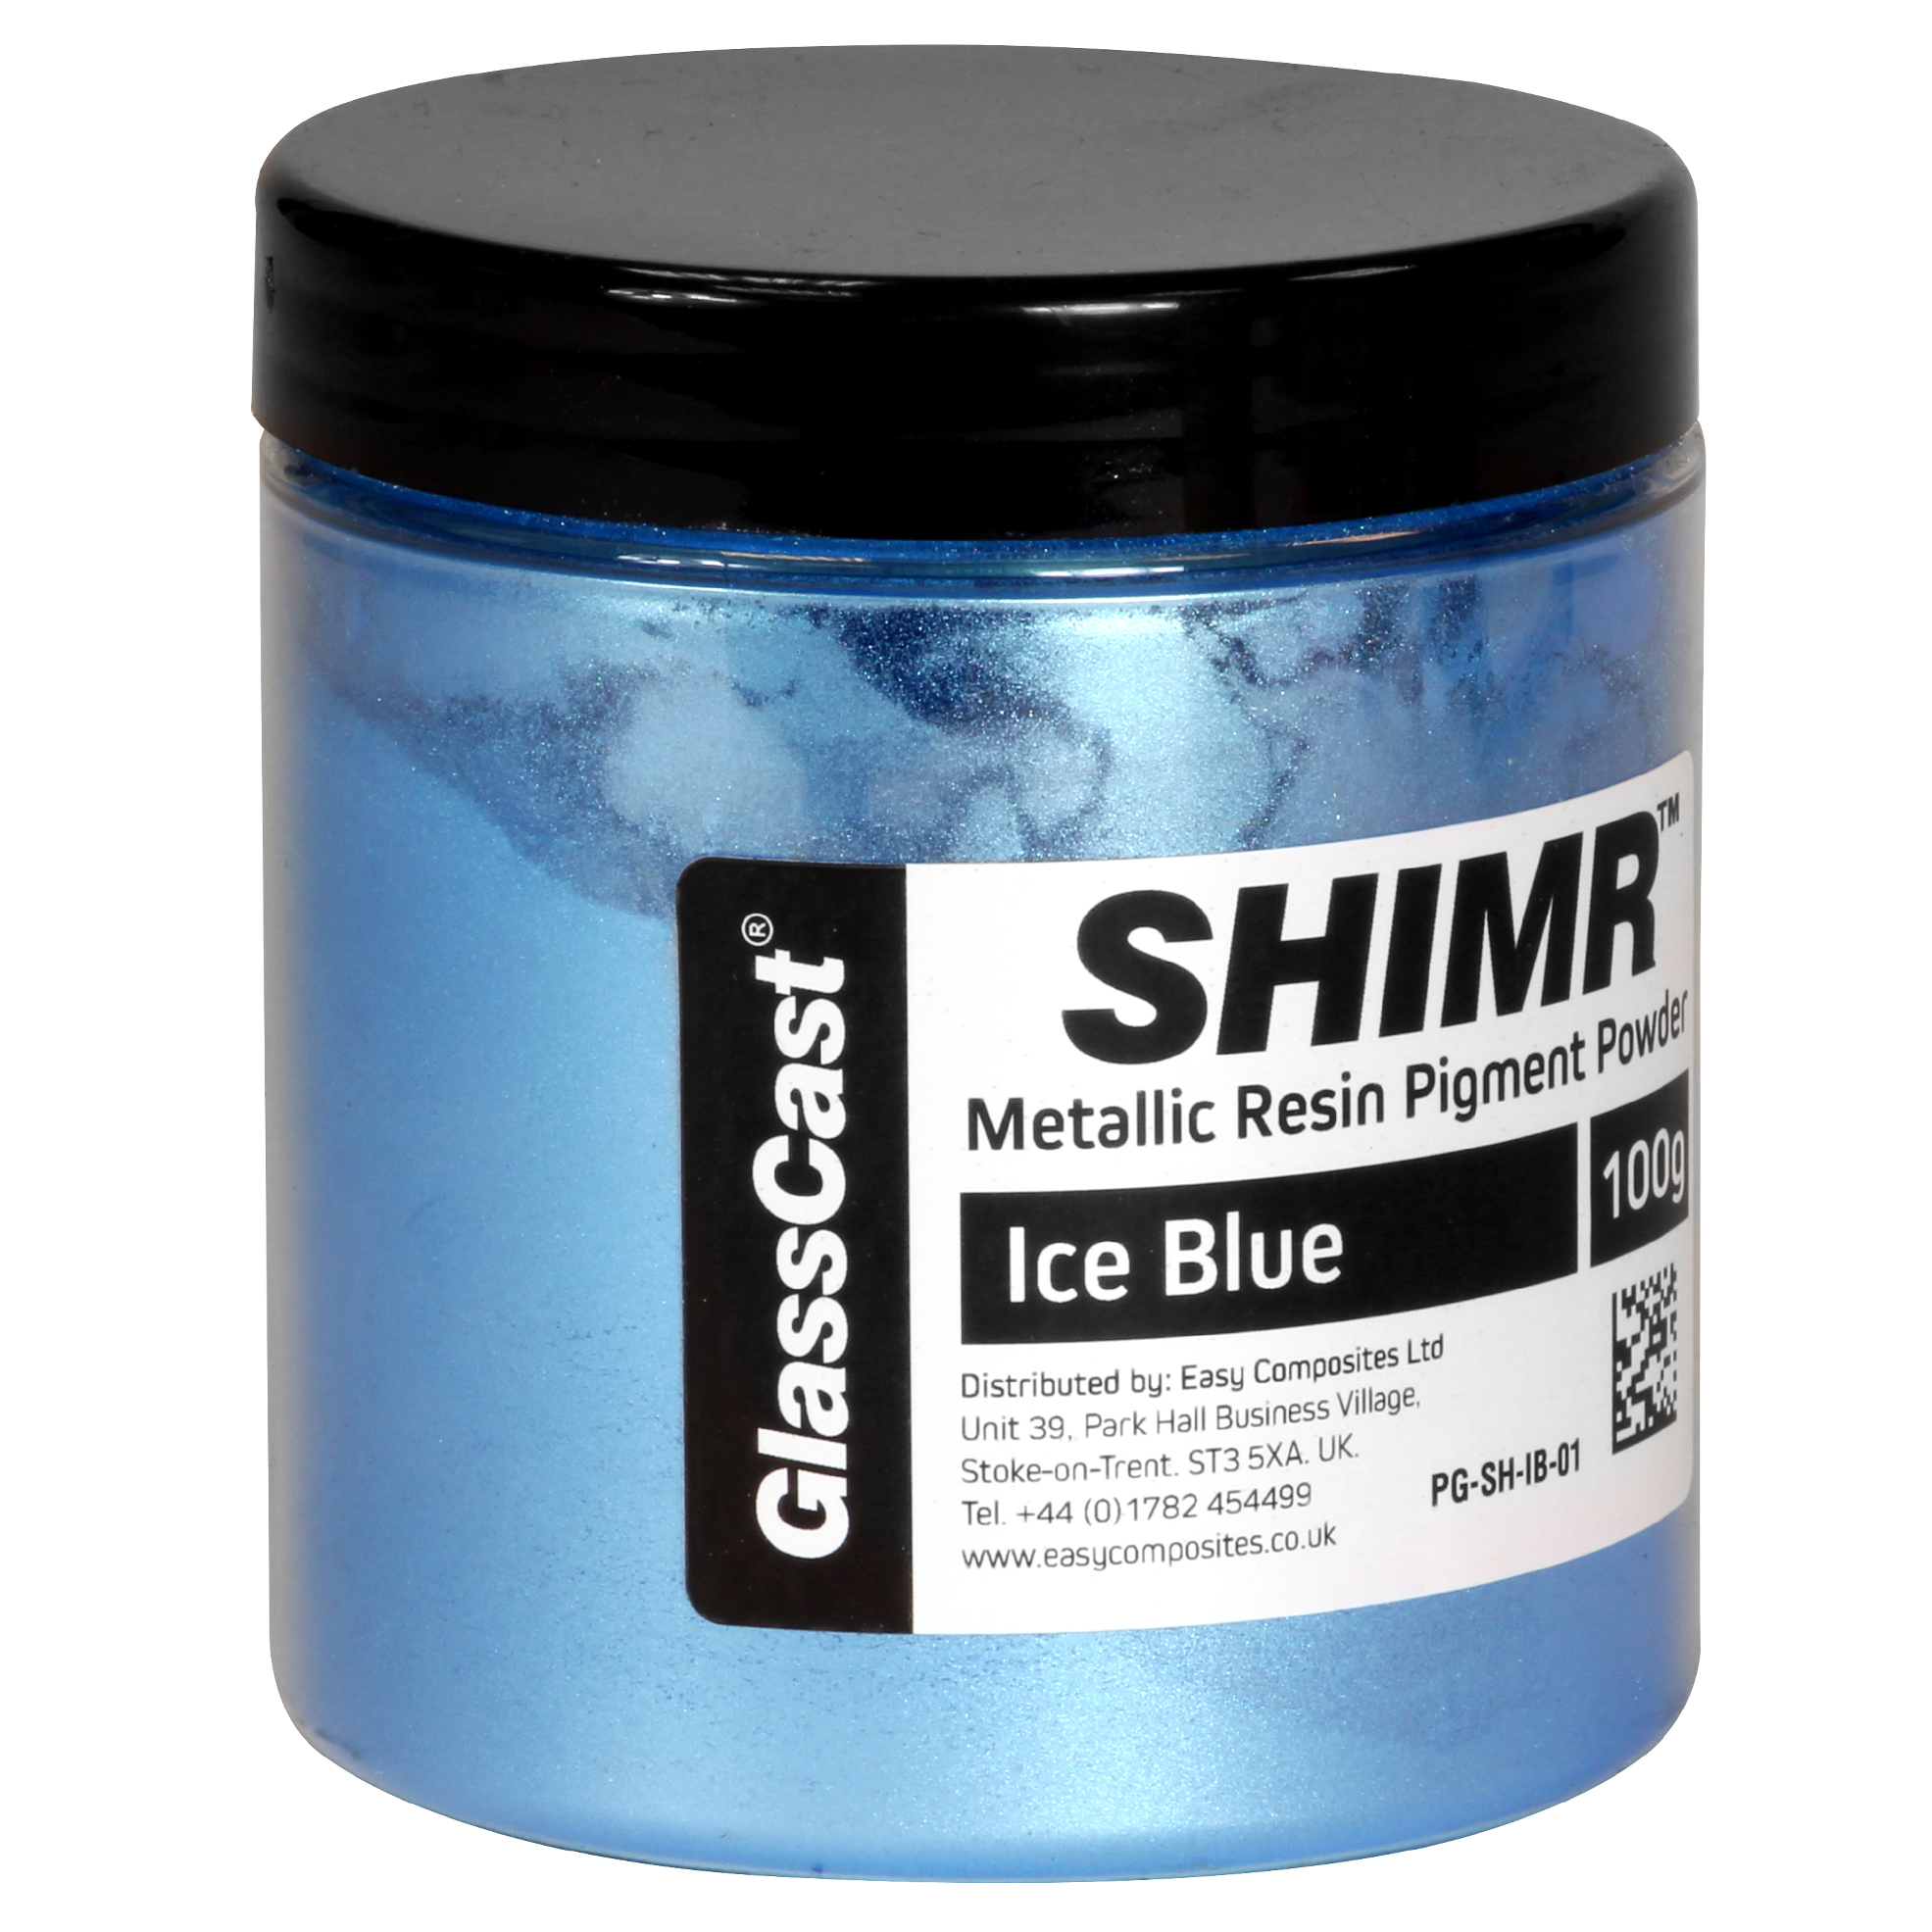 Epoxy Pigments Special Effects - GlassCast